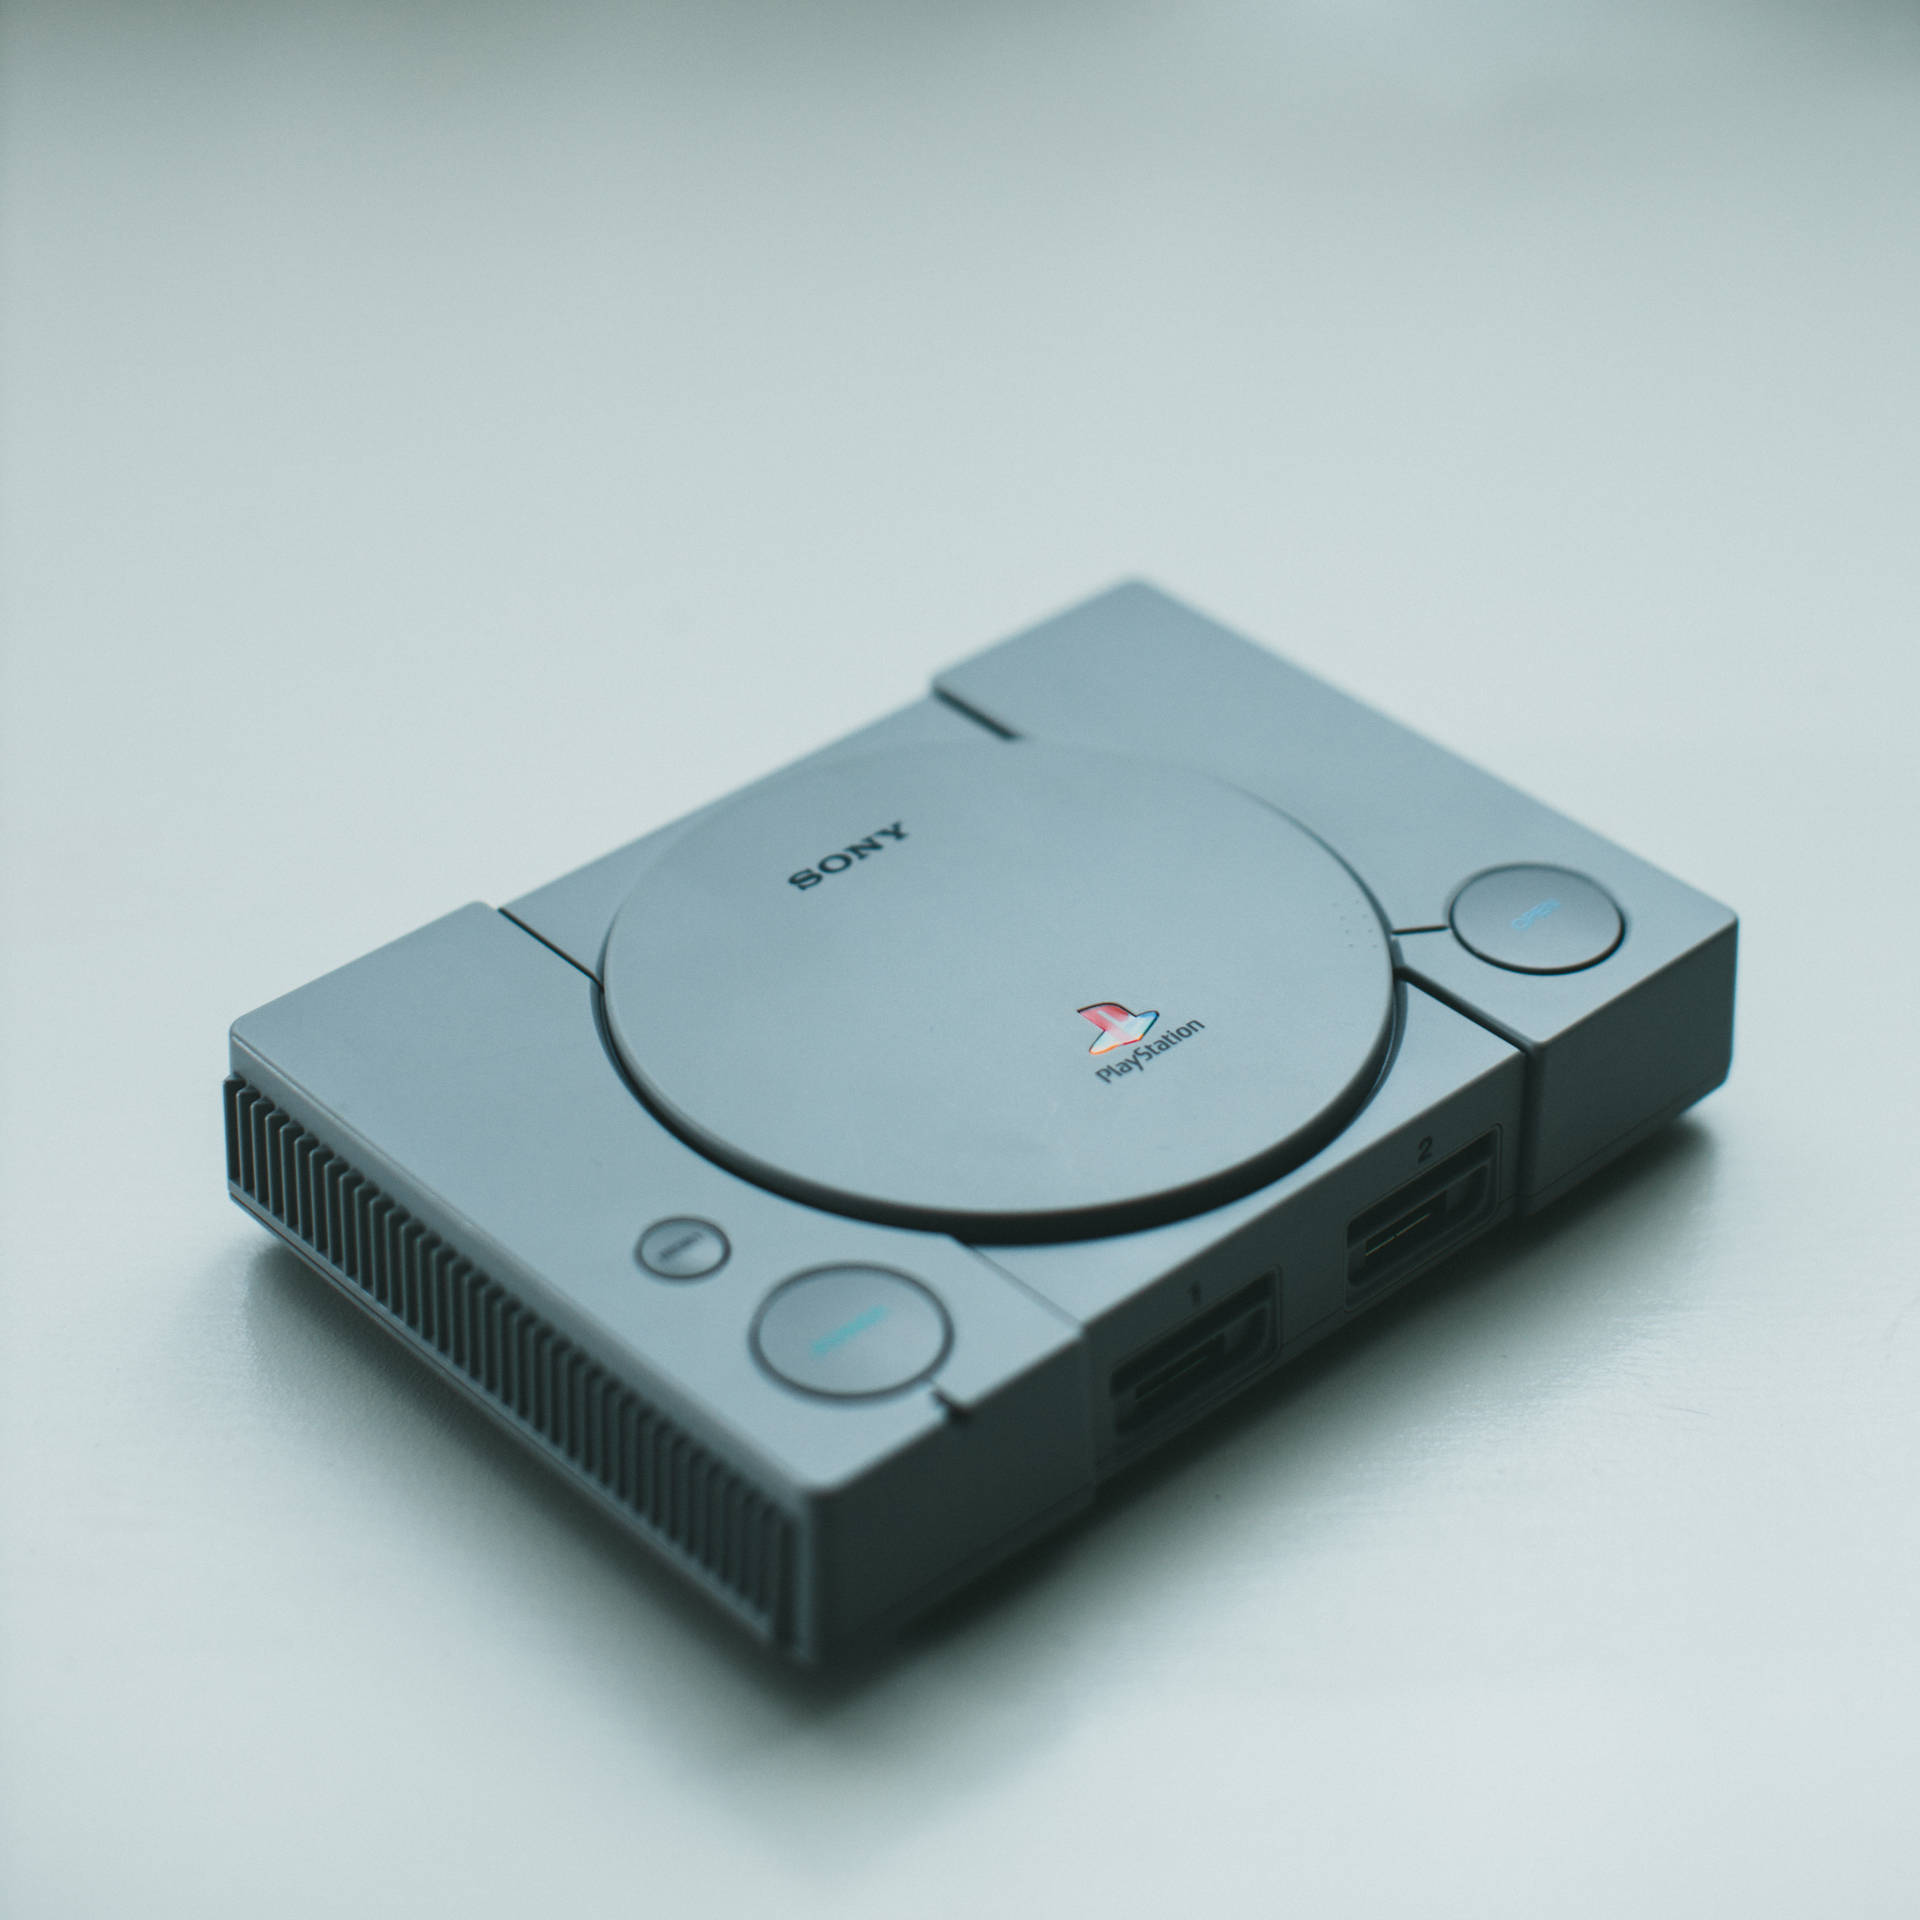 Sony Playstation Classic Wallpaper